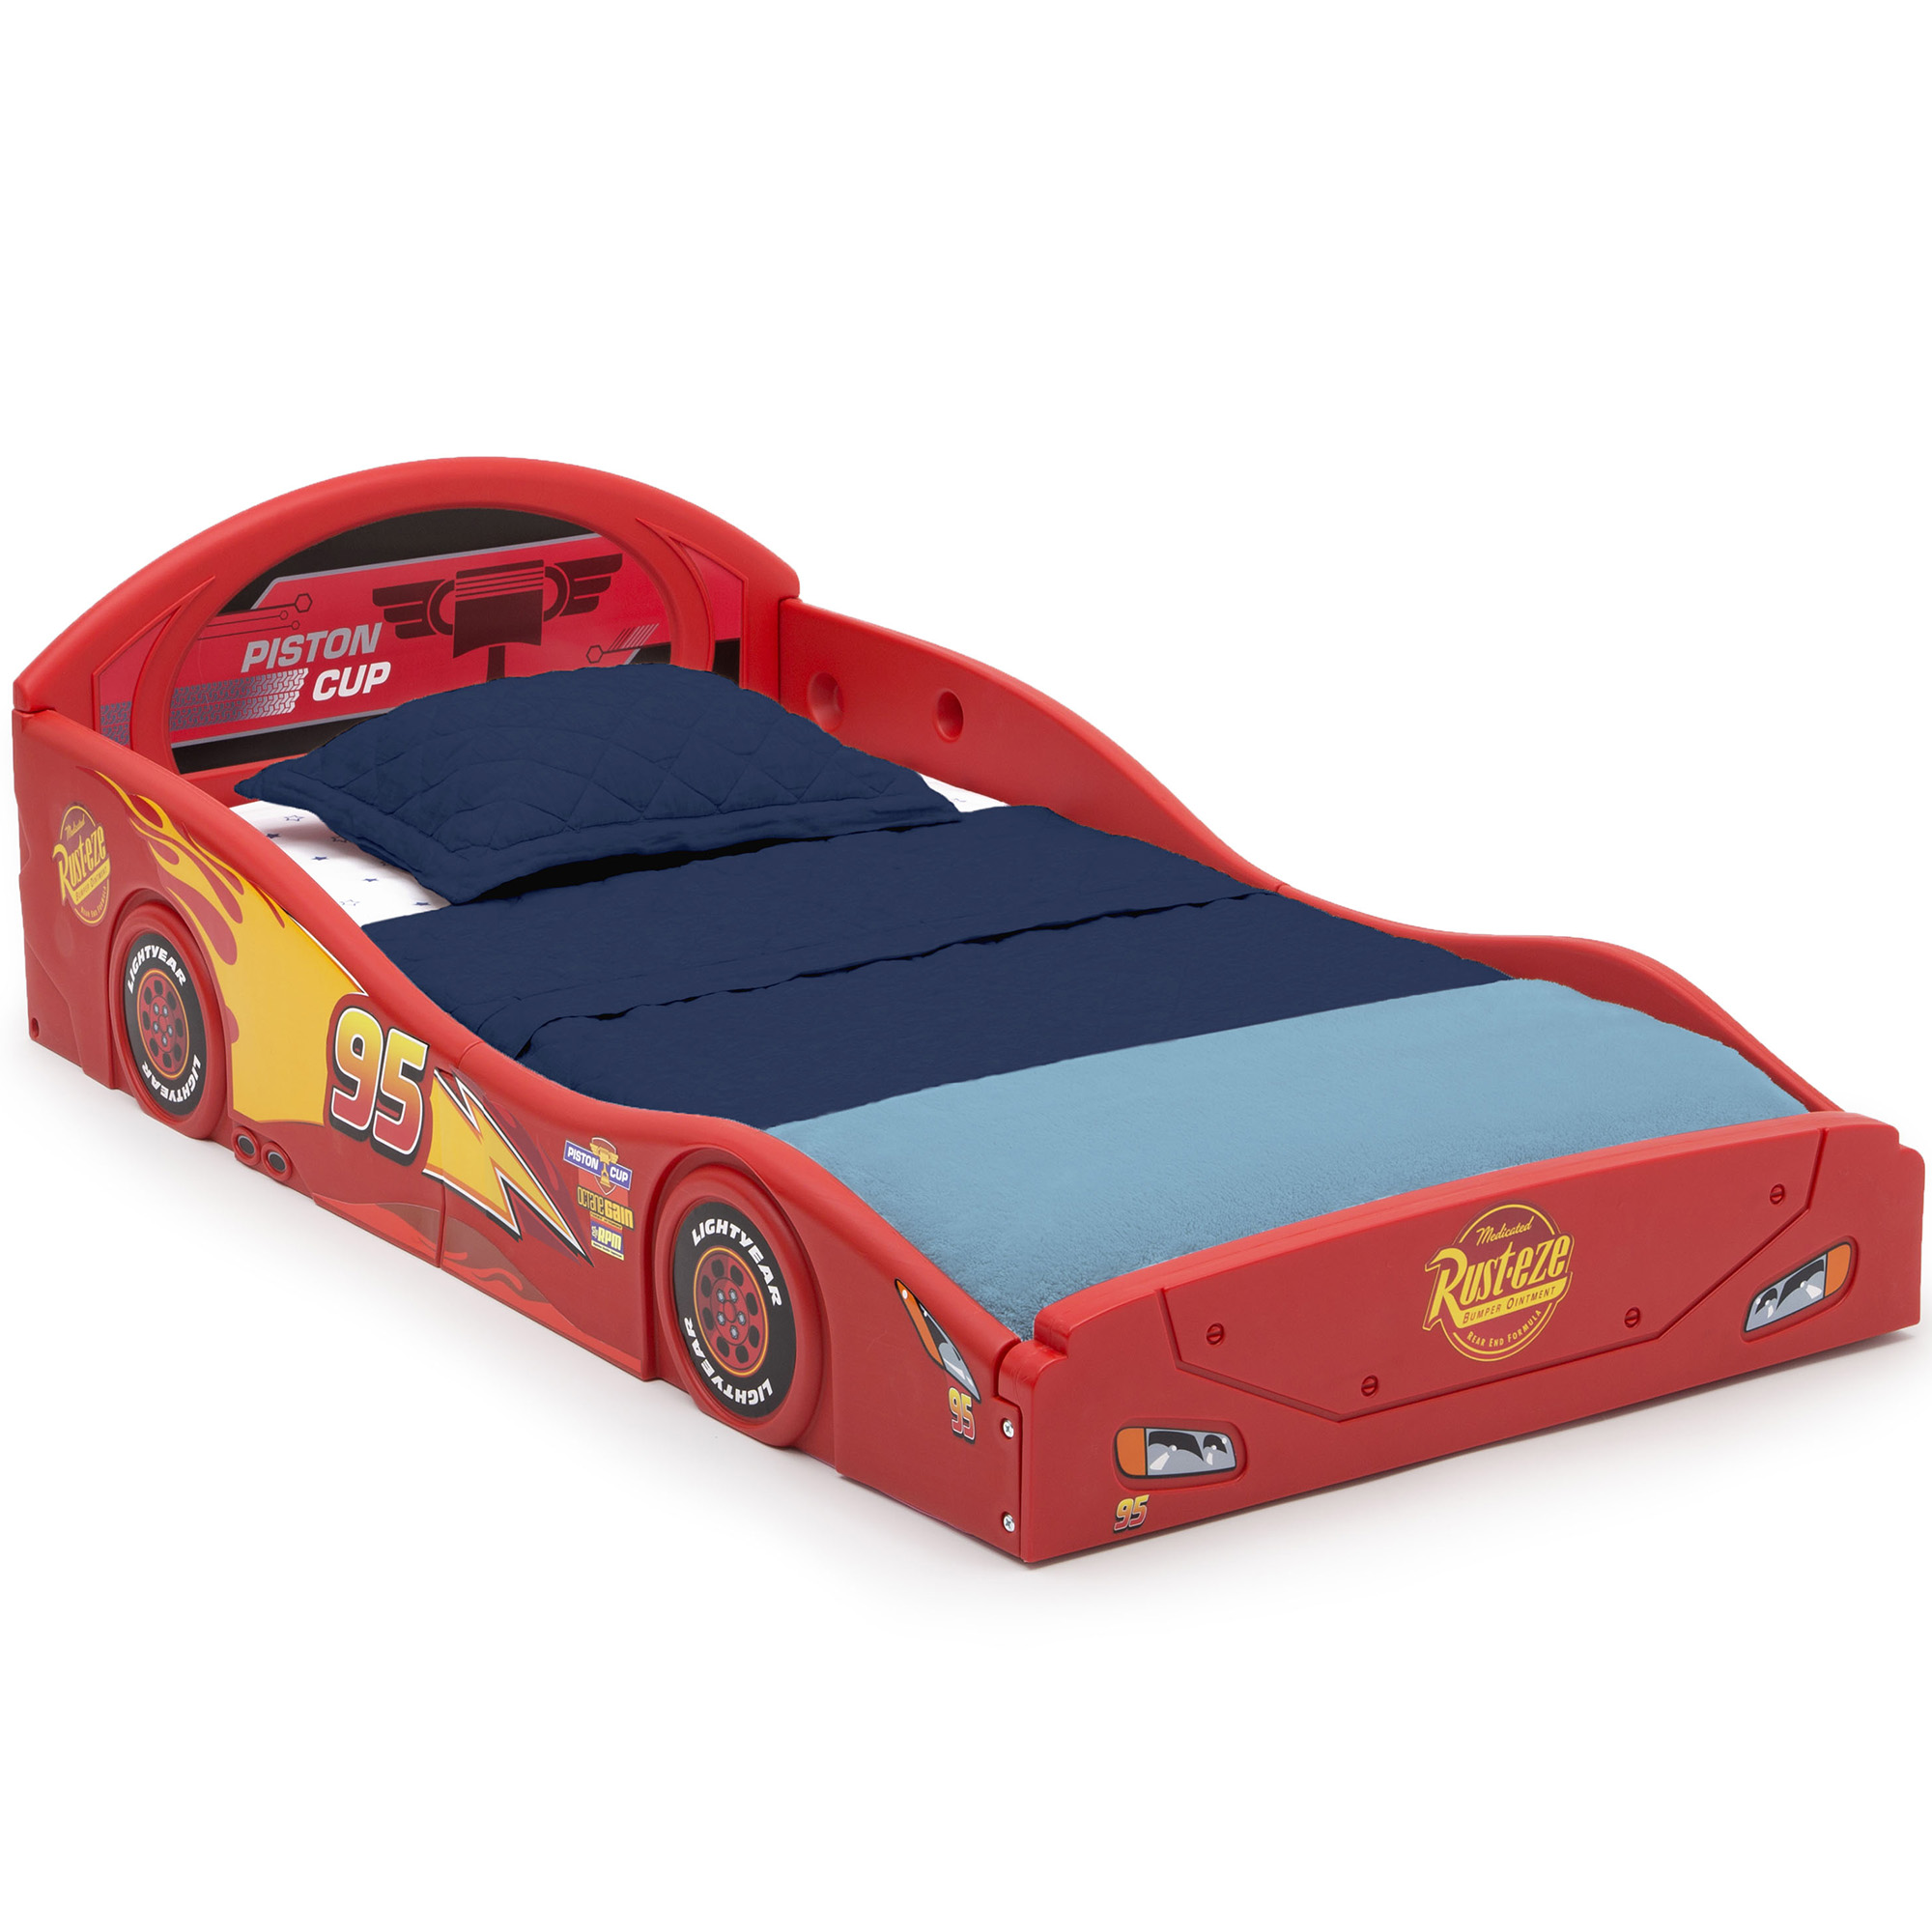 Disney Pixar Cars Lightning McQueen Plastic Sleep and Play Toddler Bed by Delta Children - image 1 of 6